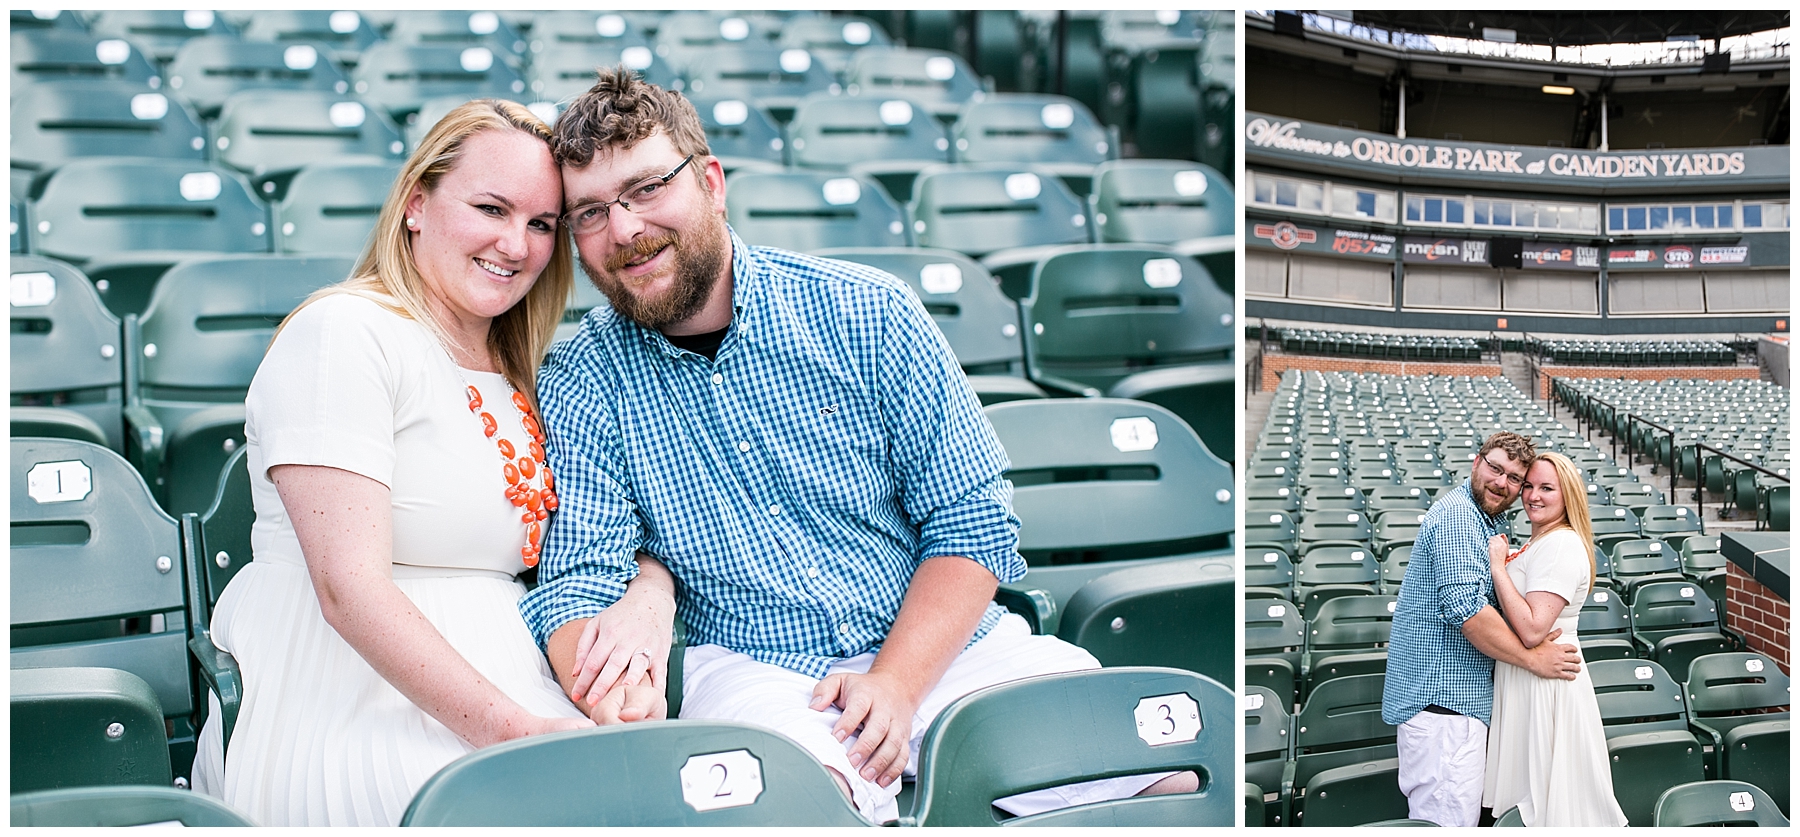 Tess Ray Camden Yards Engagement Session Living Radiant Photography photos_0016.jpg